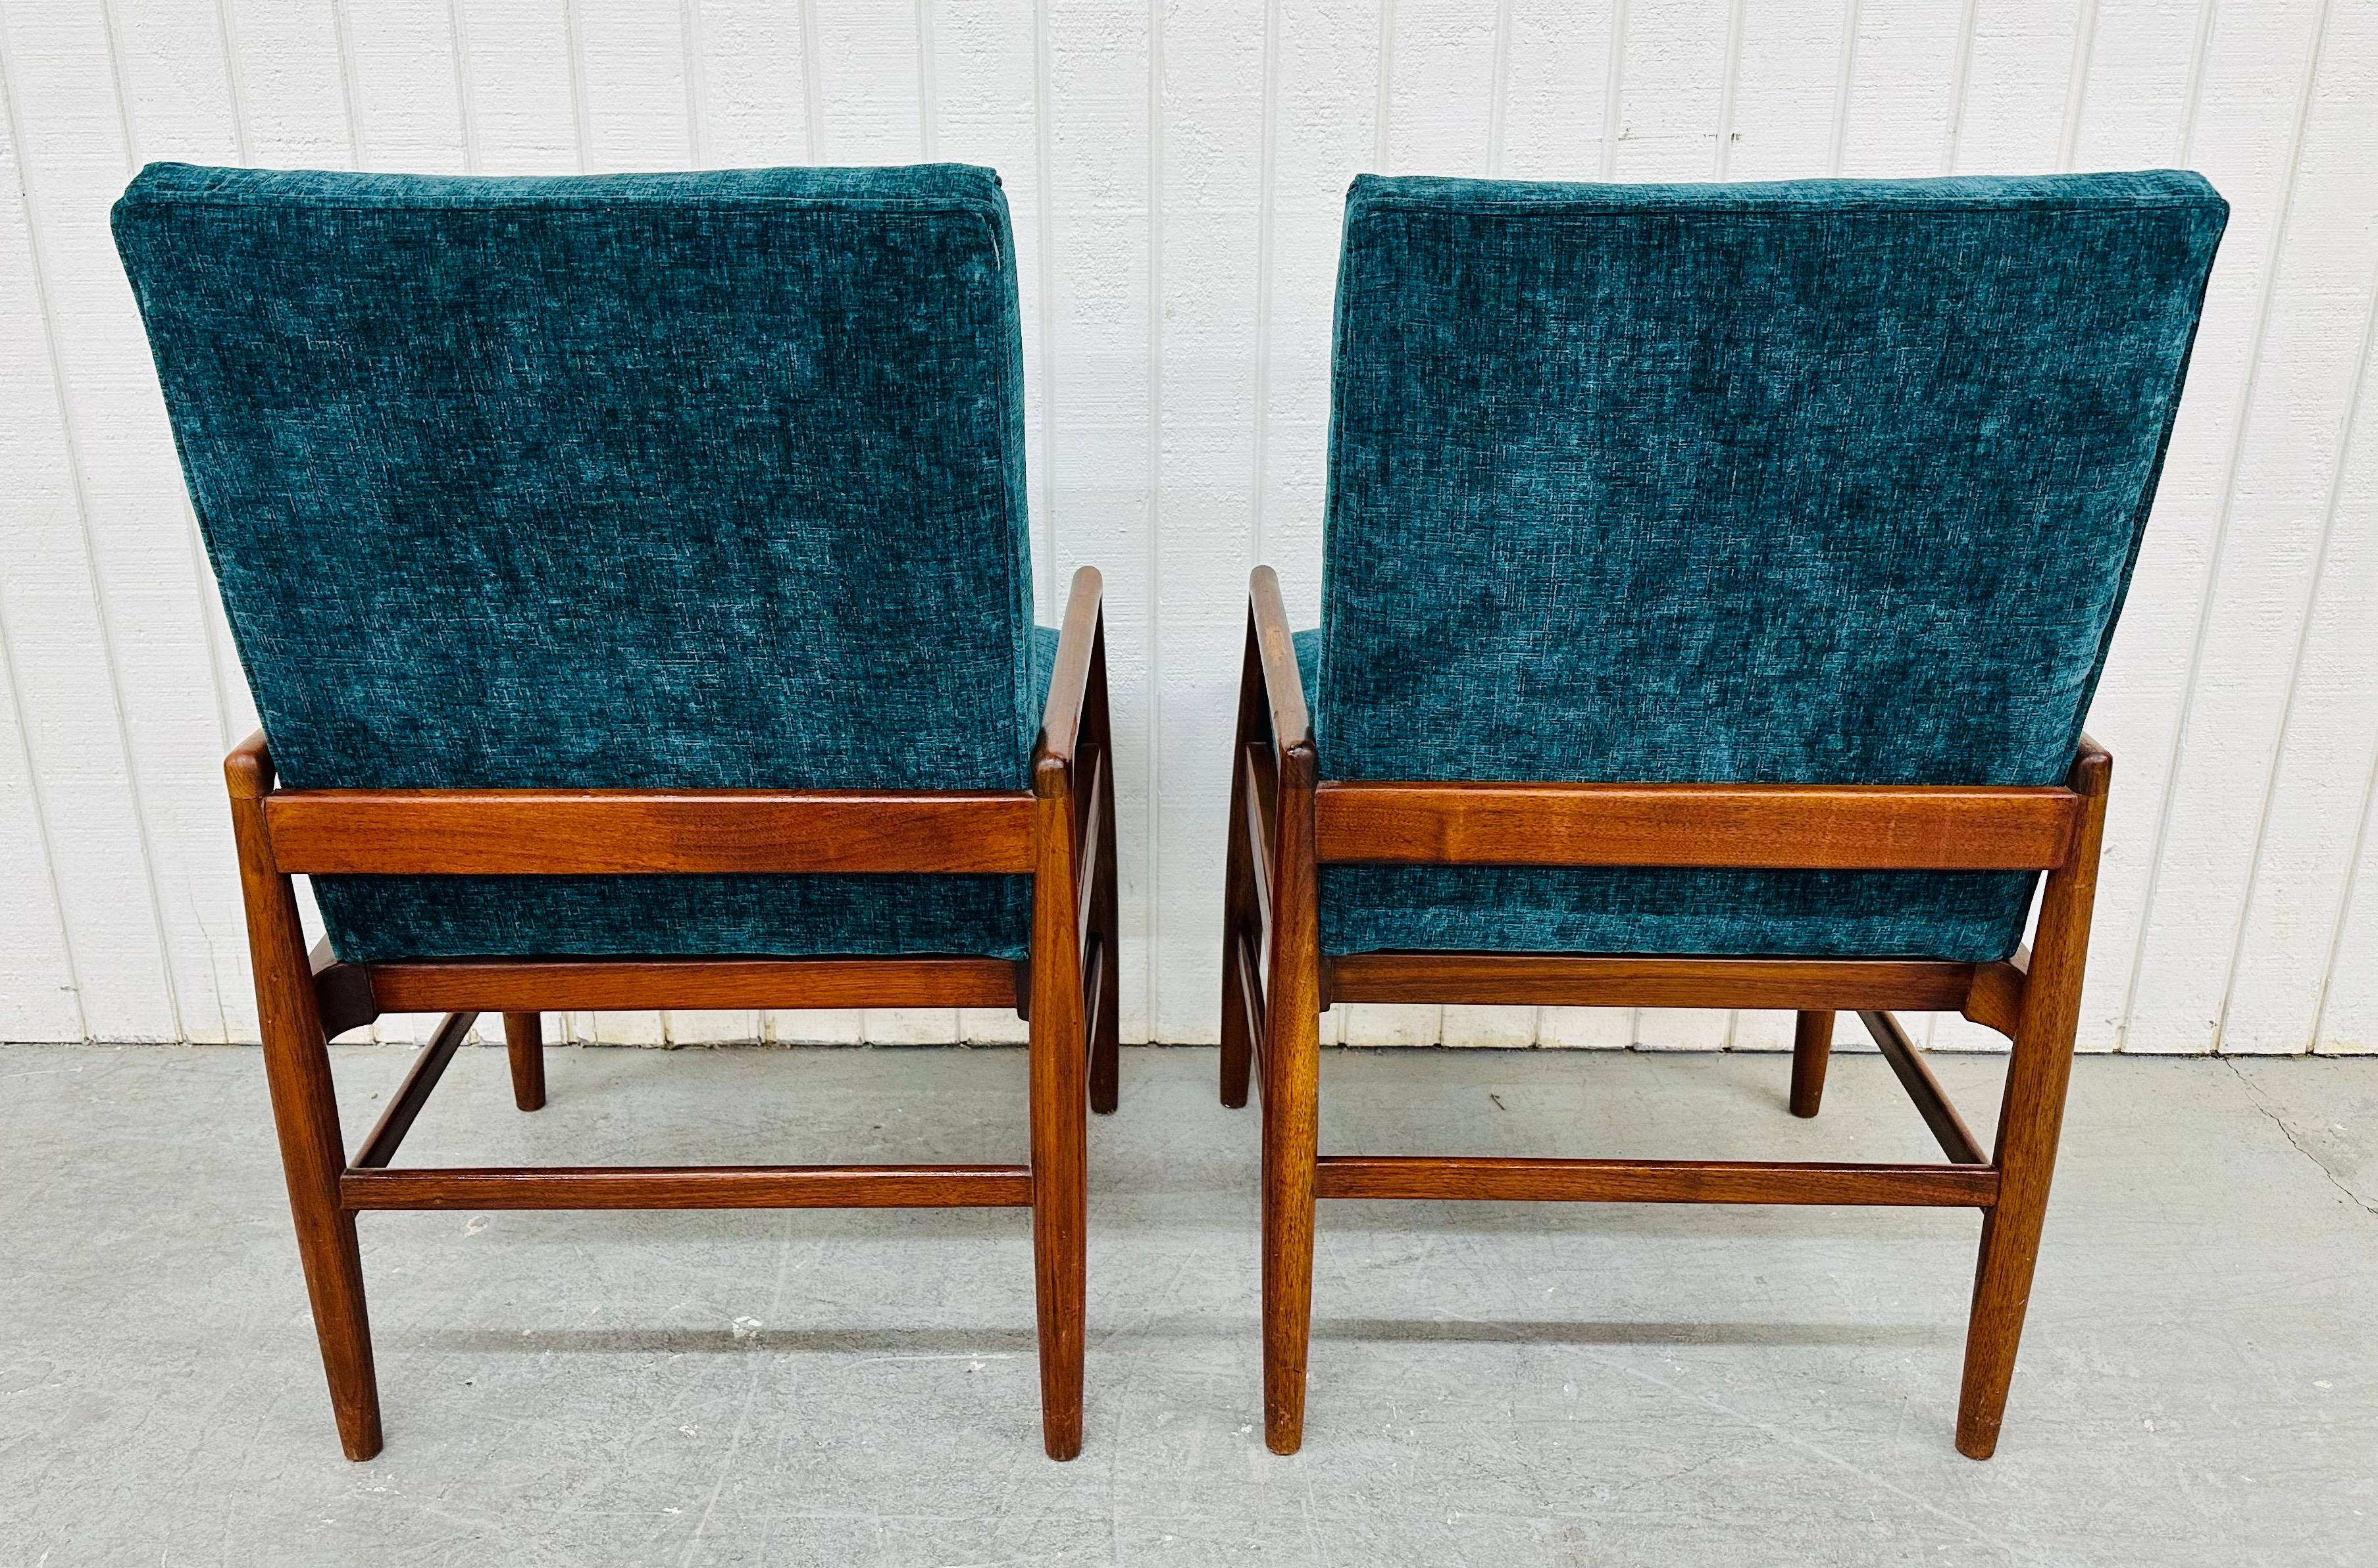 Upholstery Mid-Century Danish Modern Walnut Lounge Chairs - Set of 2 For Sale